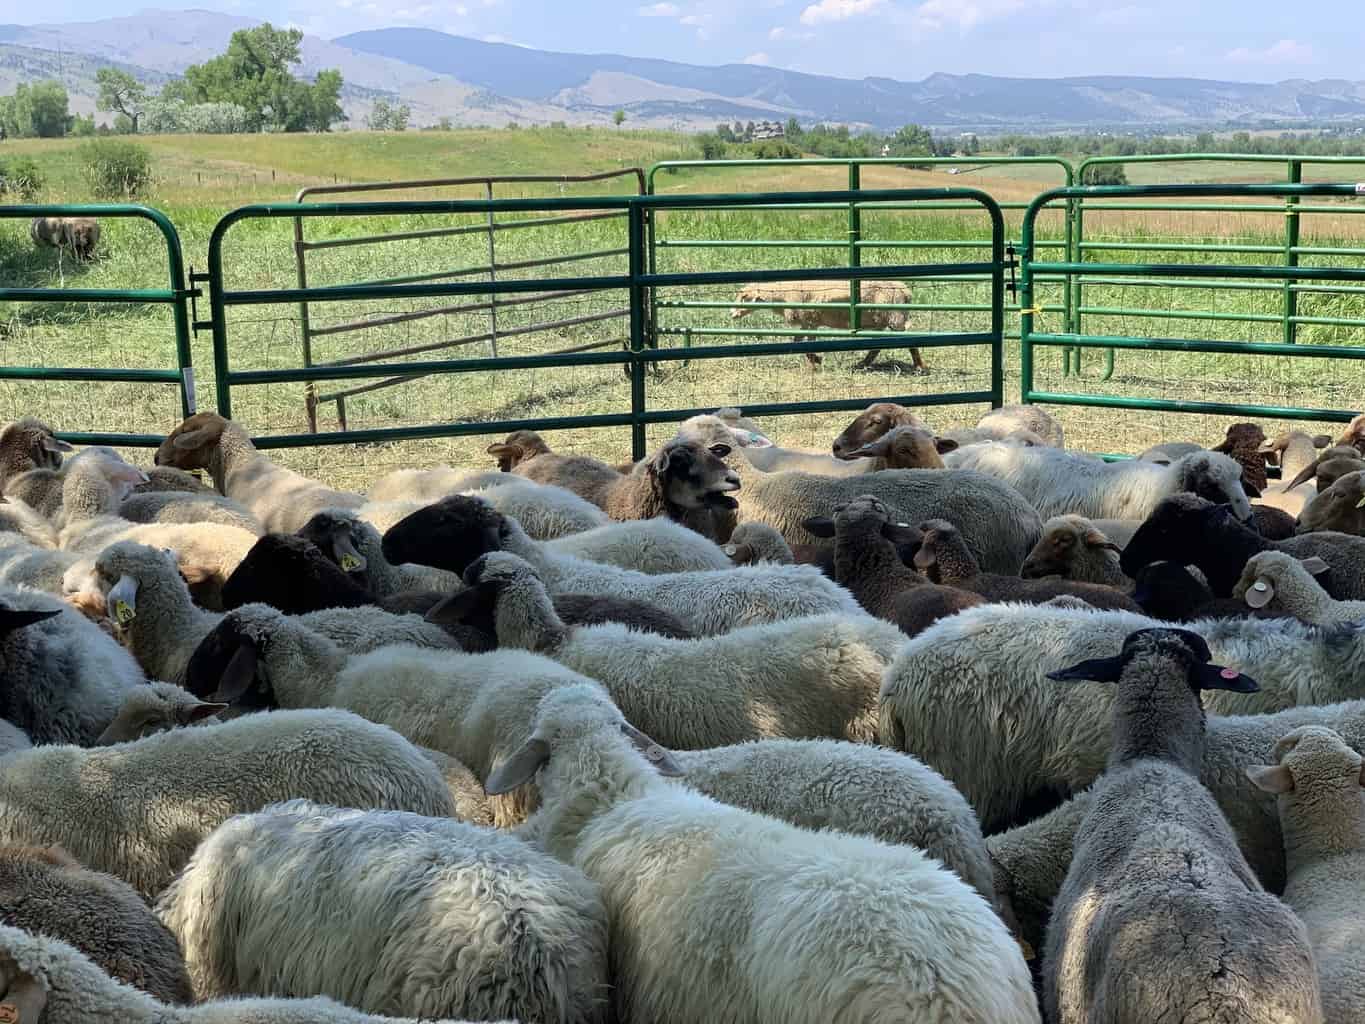 Sheep getting ready for pedicures and health checkups on Black Cat Farm